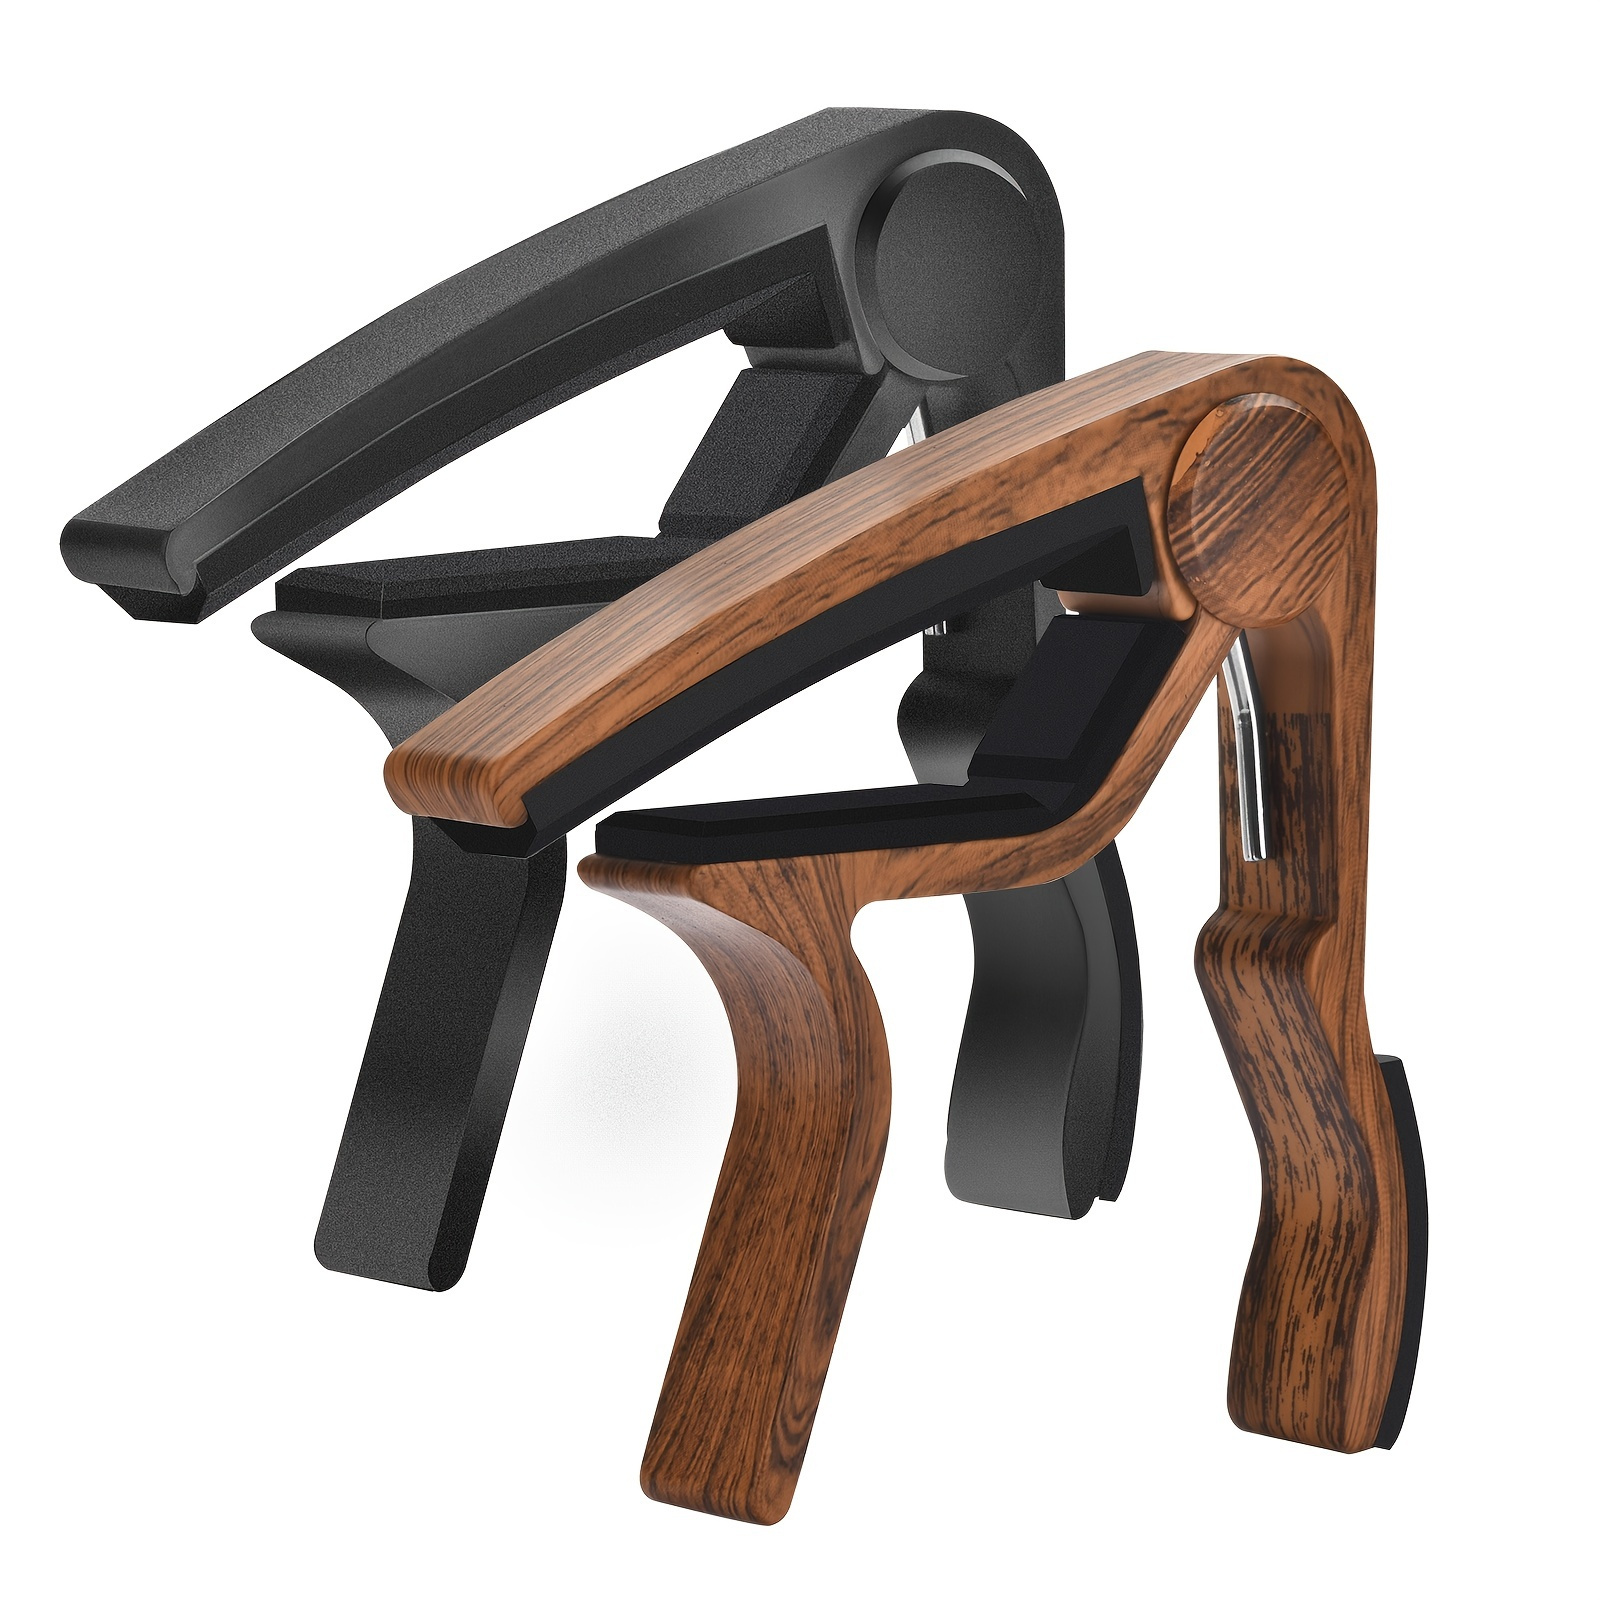 

Upgrade Your Guitar Performance With This 2-pack Of Premium Capos - Acoustic, Electric, Bass!